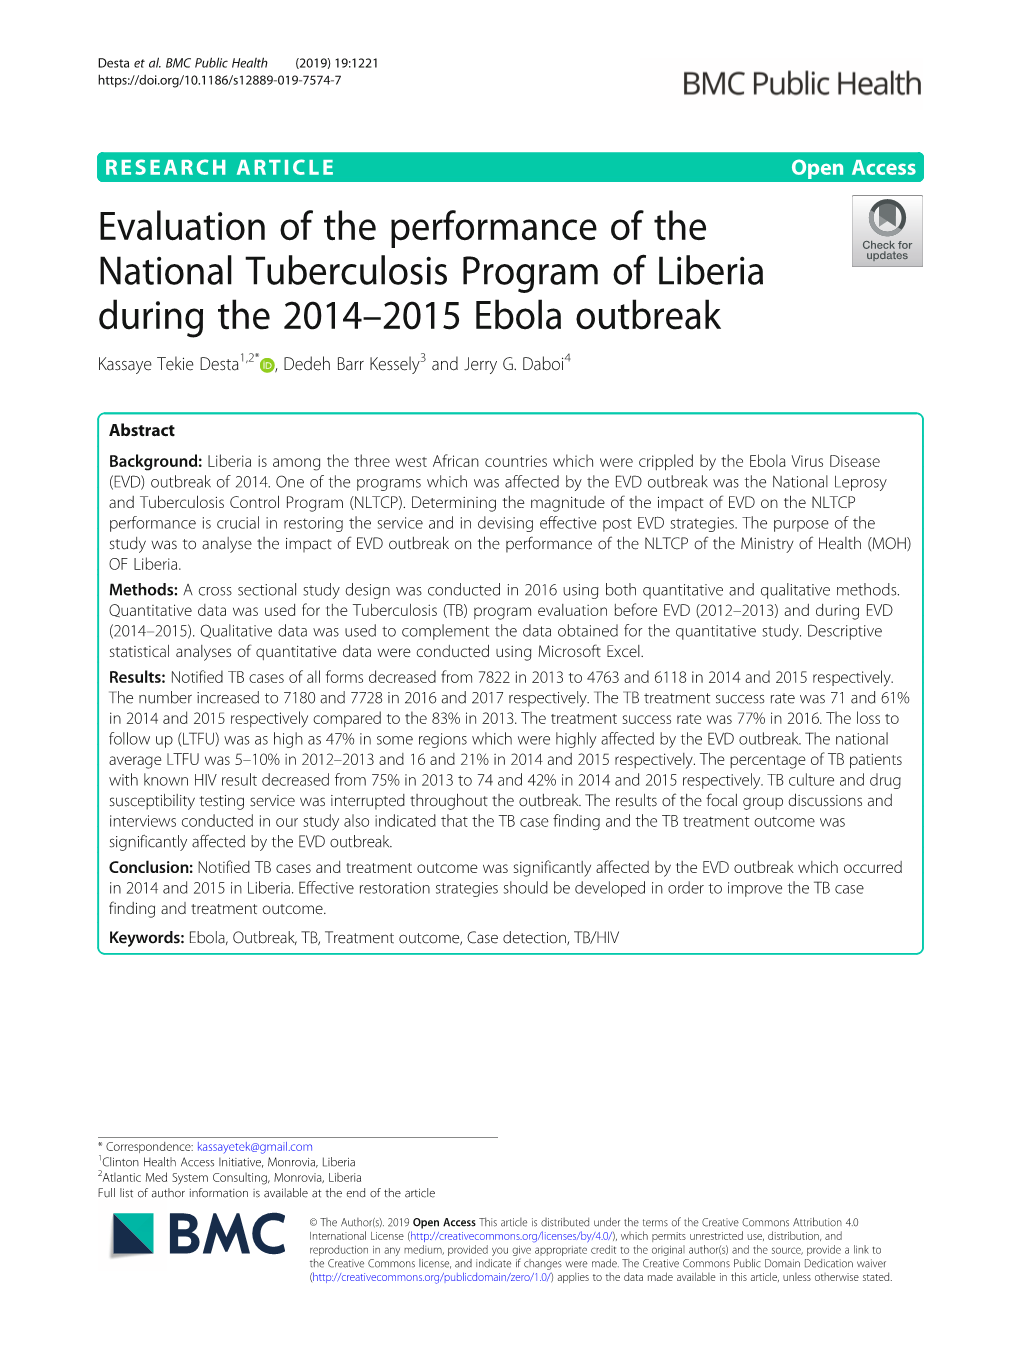 Evaluation of the Performance of the National Tuberculosis Program Of